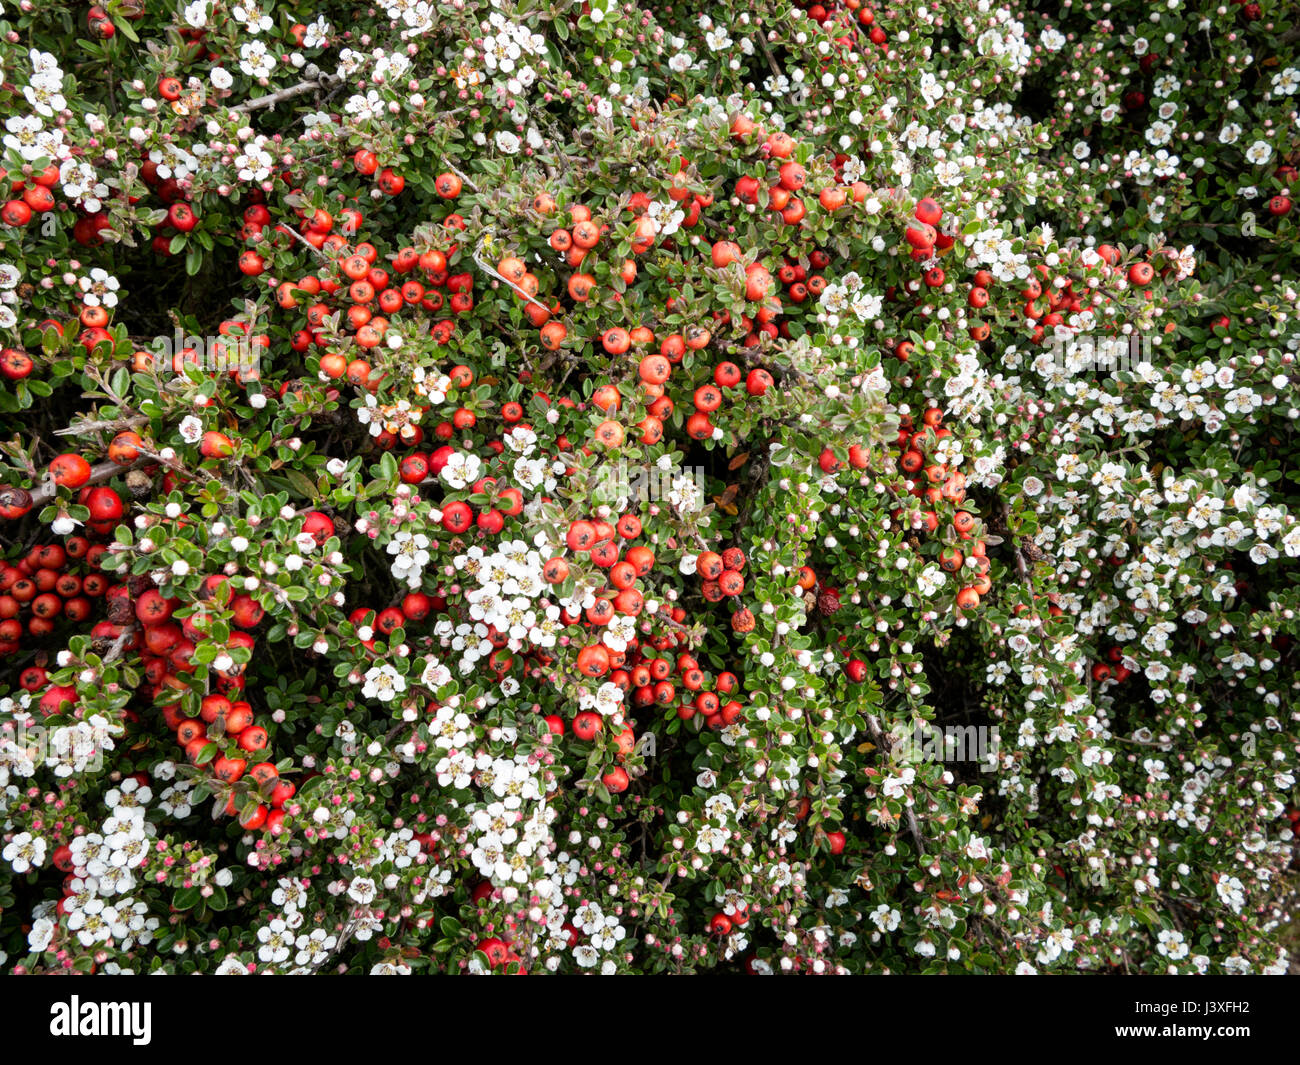 A rare occurence of a Cotoniasta Horizontalis shrub showing blossom flowers as well as berries Stock Photo